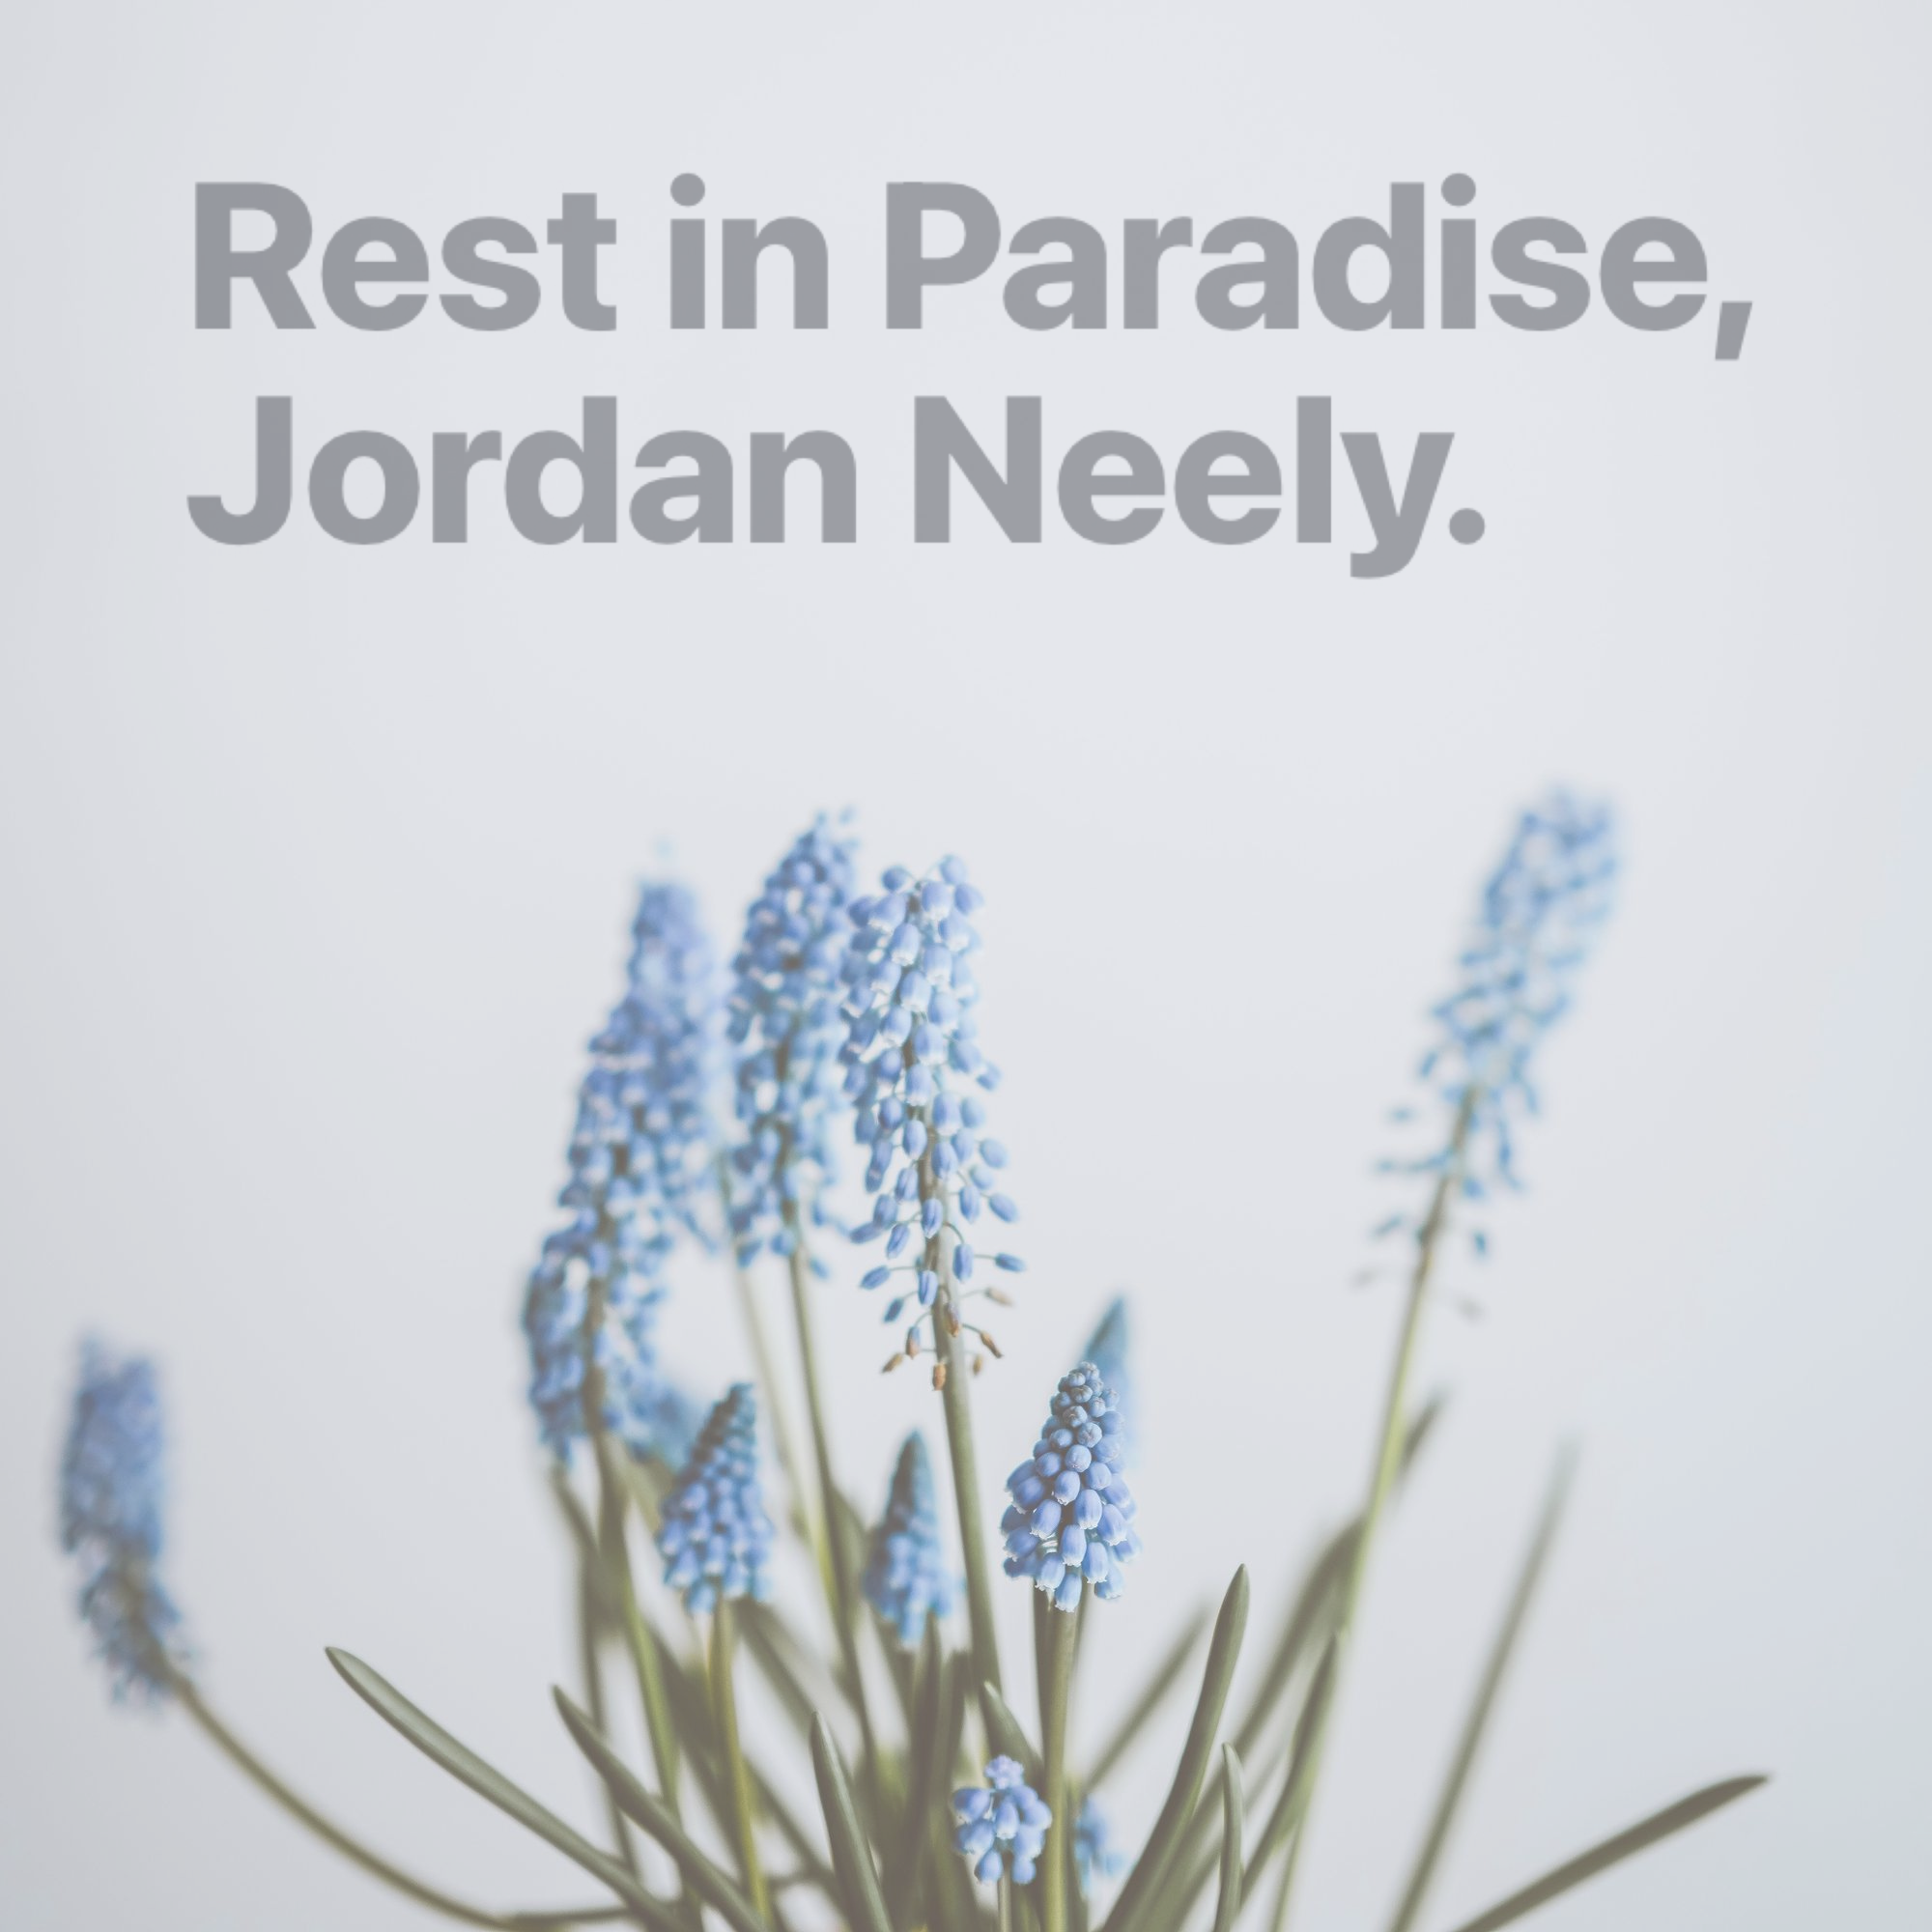 at the top, light black text says "Rest in Paradise, Jordan Neely." underneath the text is a photograph of a bunch of light blue flowers. the background is a plain pale white wall.